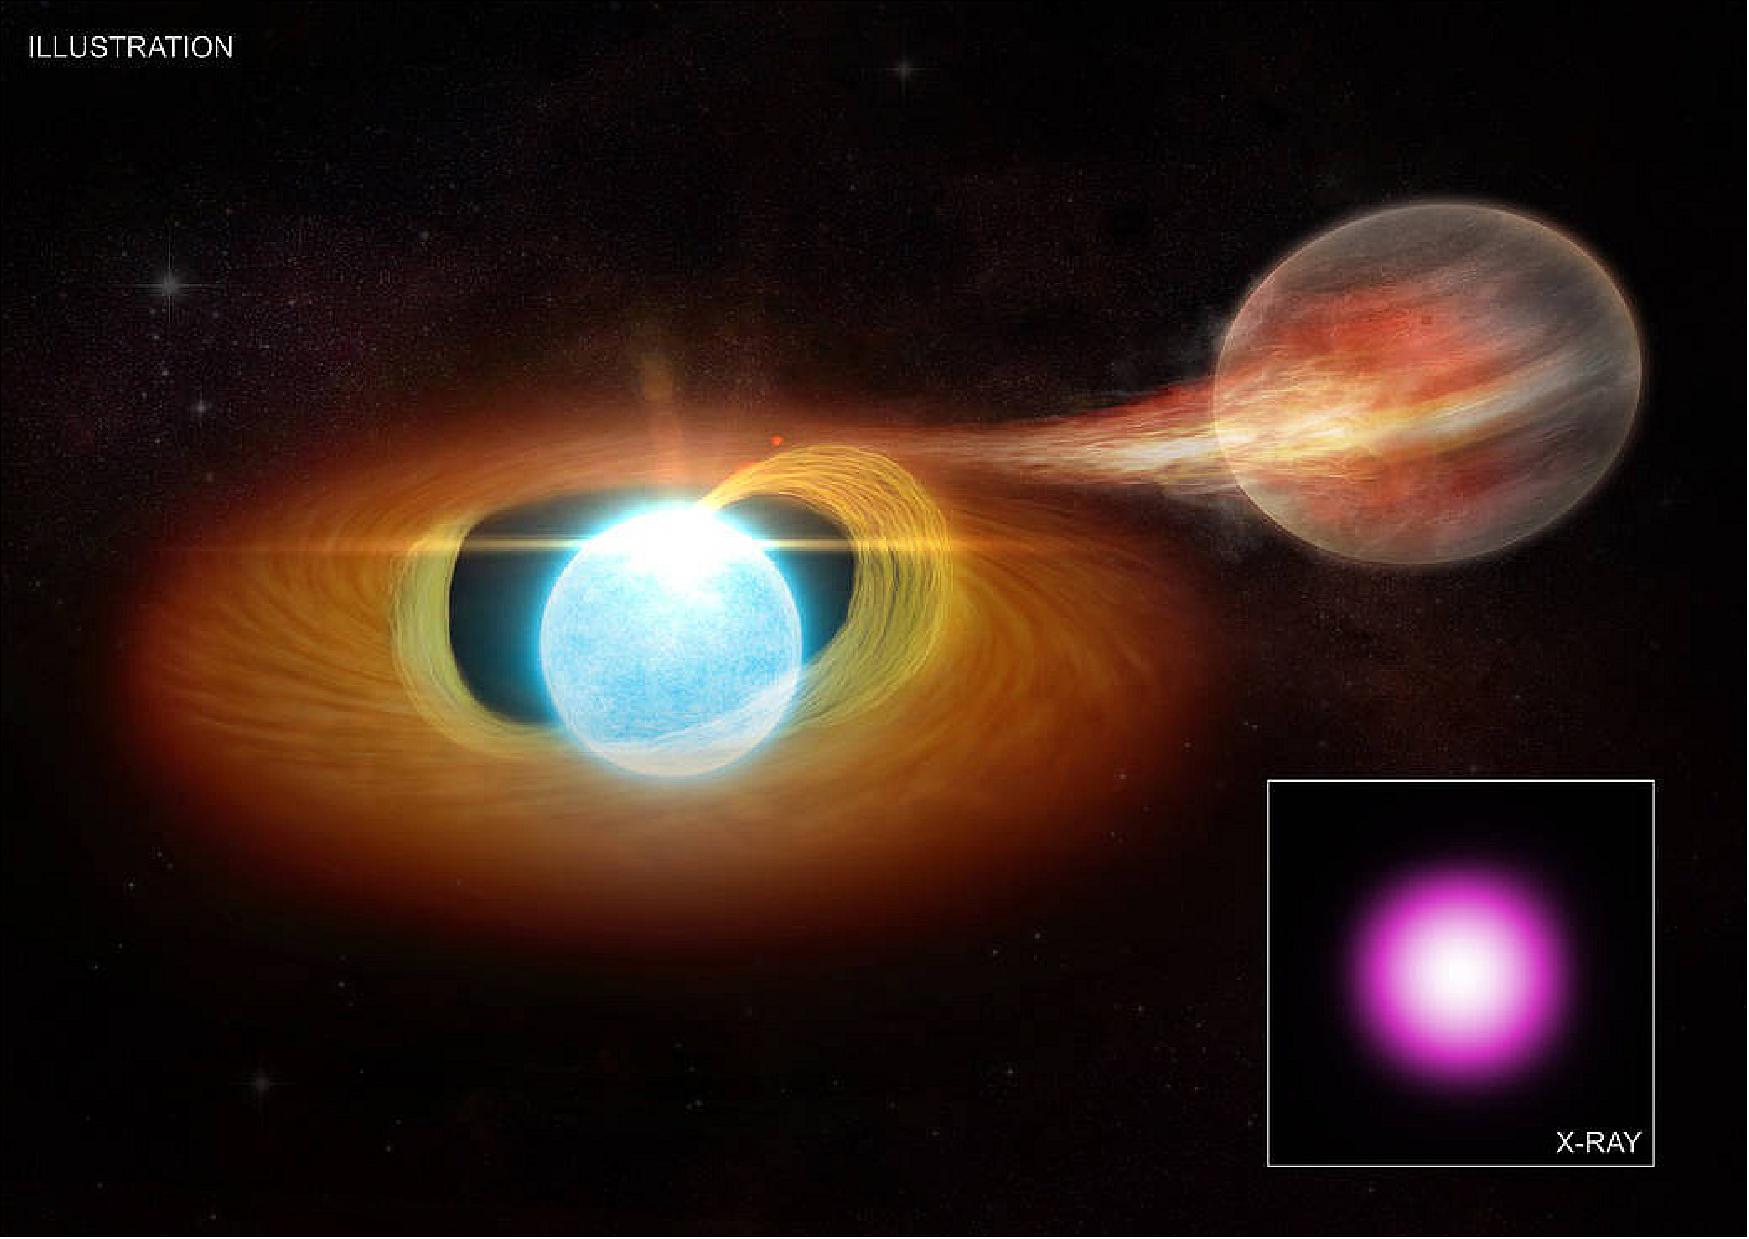 Figure 9: A white dwarf is blasting a companion object, which is either a low-mass star or a planet. The companion is likely receiving a barrage of heat and radiation, plus the effects of powerful gravitational forces. Astronomers used NASA's Chandra X-ray Observatory to identify unusual activity from this white dwarf. If this companion is a planet the size of Jupiter, it would only survive for a few hundred million years (image credit: X-ray: Illustration: NASA/CXC/M. Weiss; X-ray (Inset): NASA/CXC/ASIAA/Y. Chu. et al.)